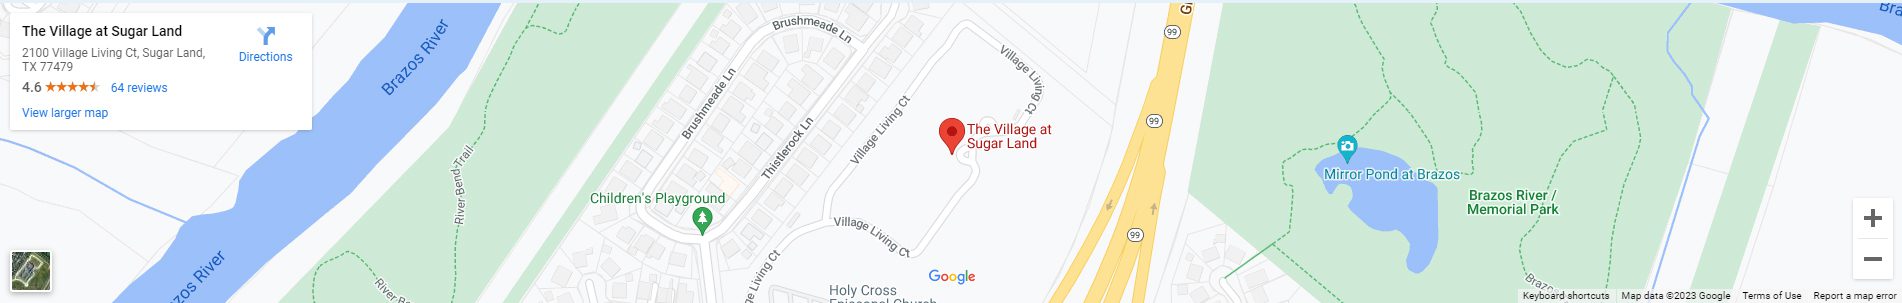 A map of the location of the village at sugar land.